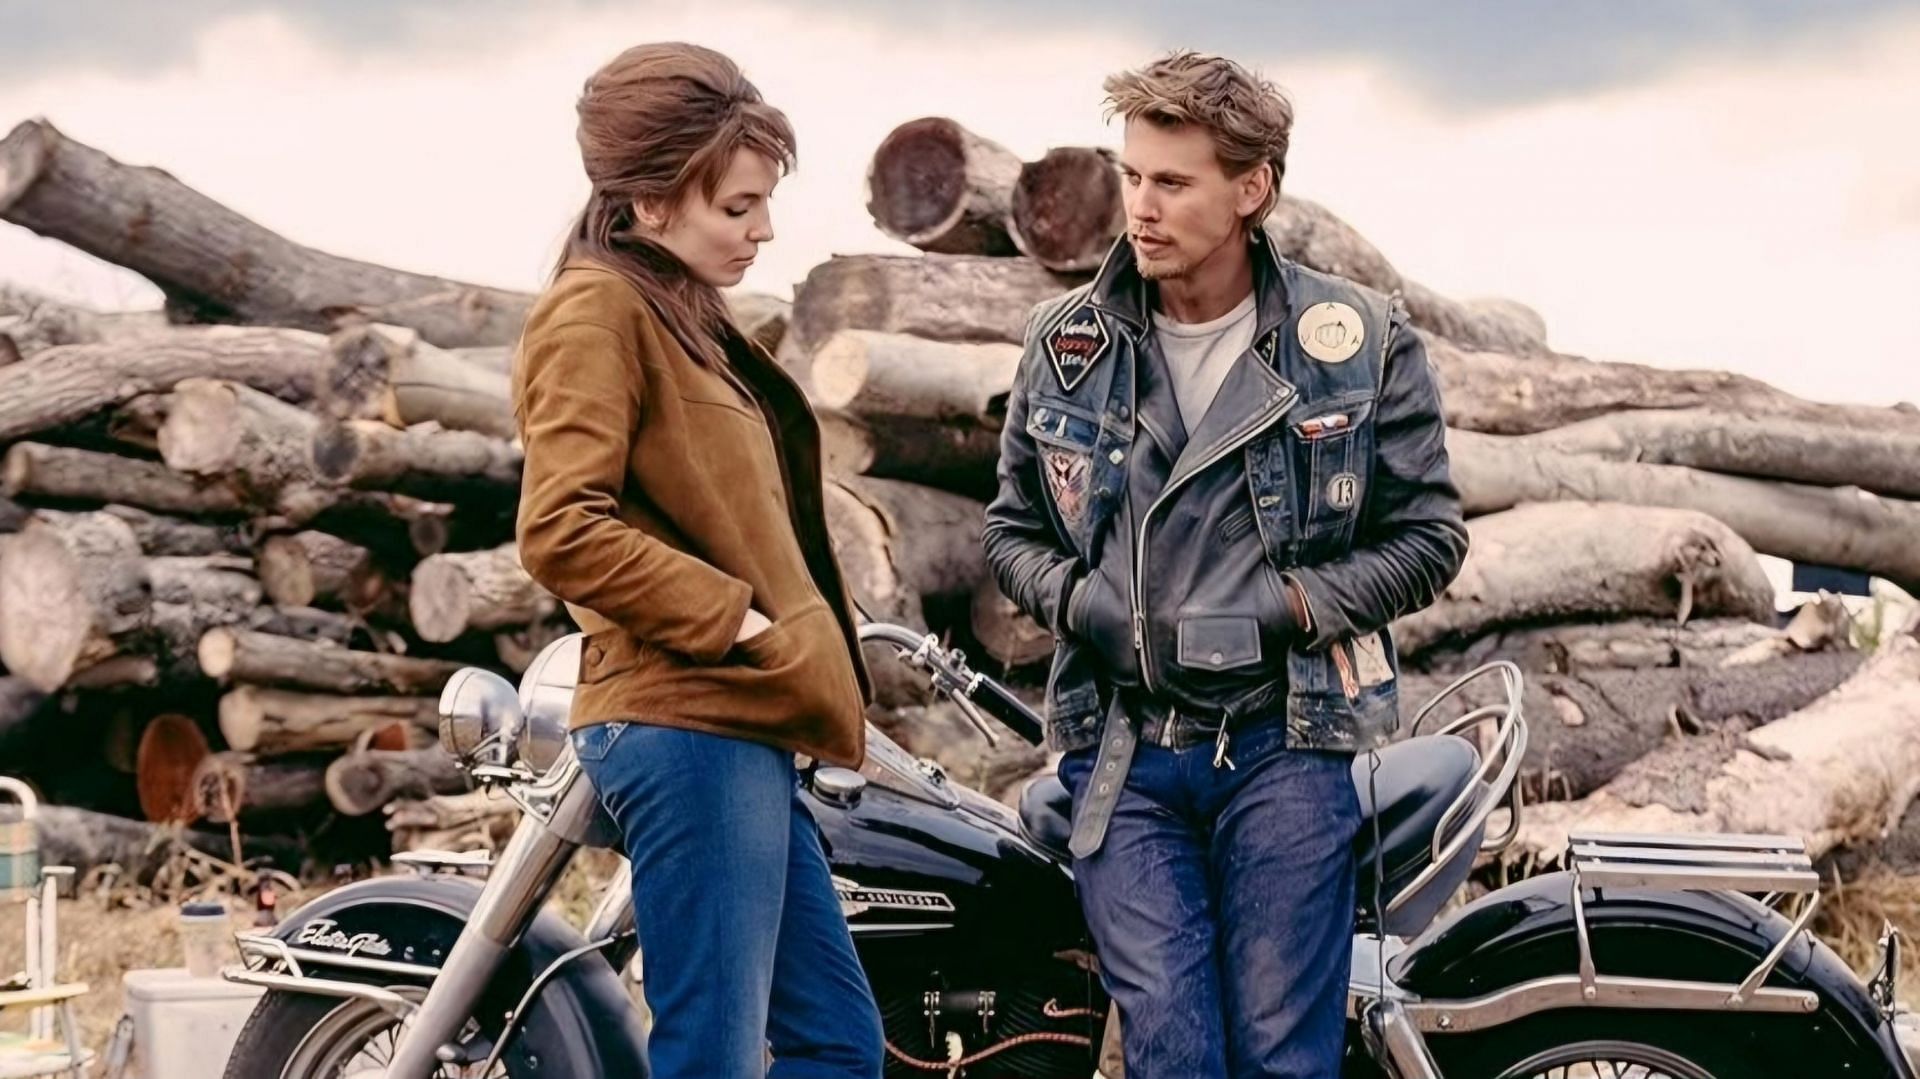 A still from the film The Bikeriders featuring Benny and Kathy (Image via Focus Features)